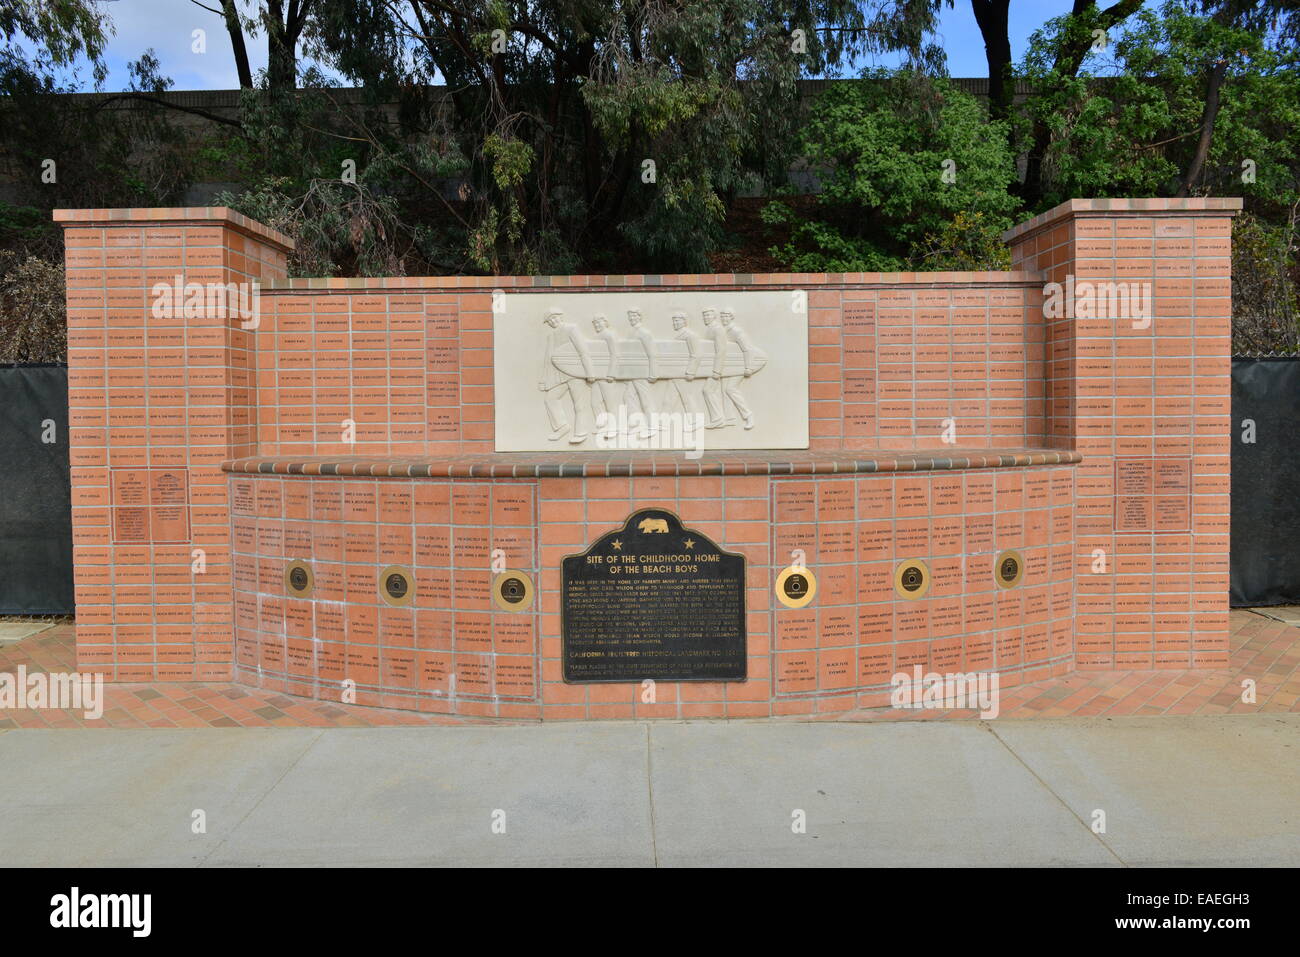 Beach Boys Memorial of where they were raised at Hawthorne county, Los Angeles. Stock Photo